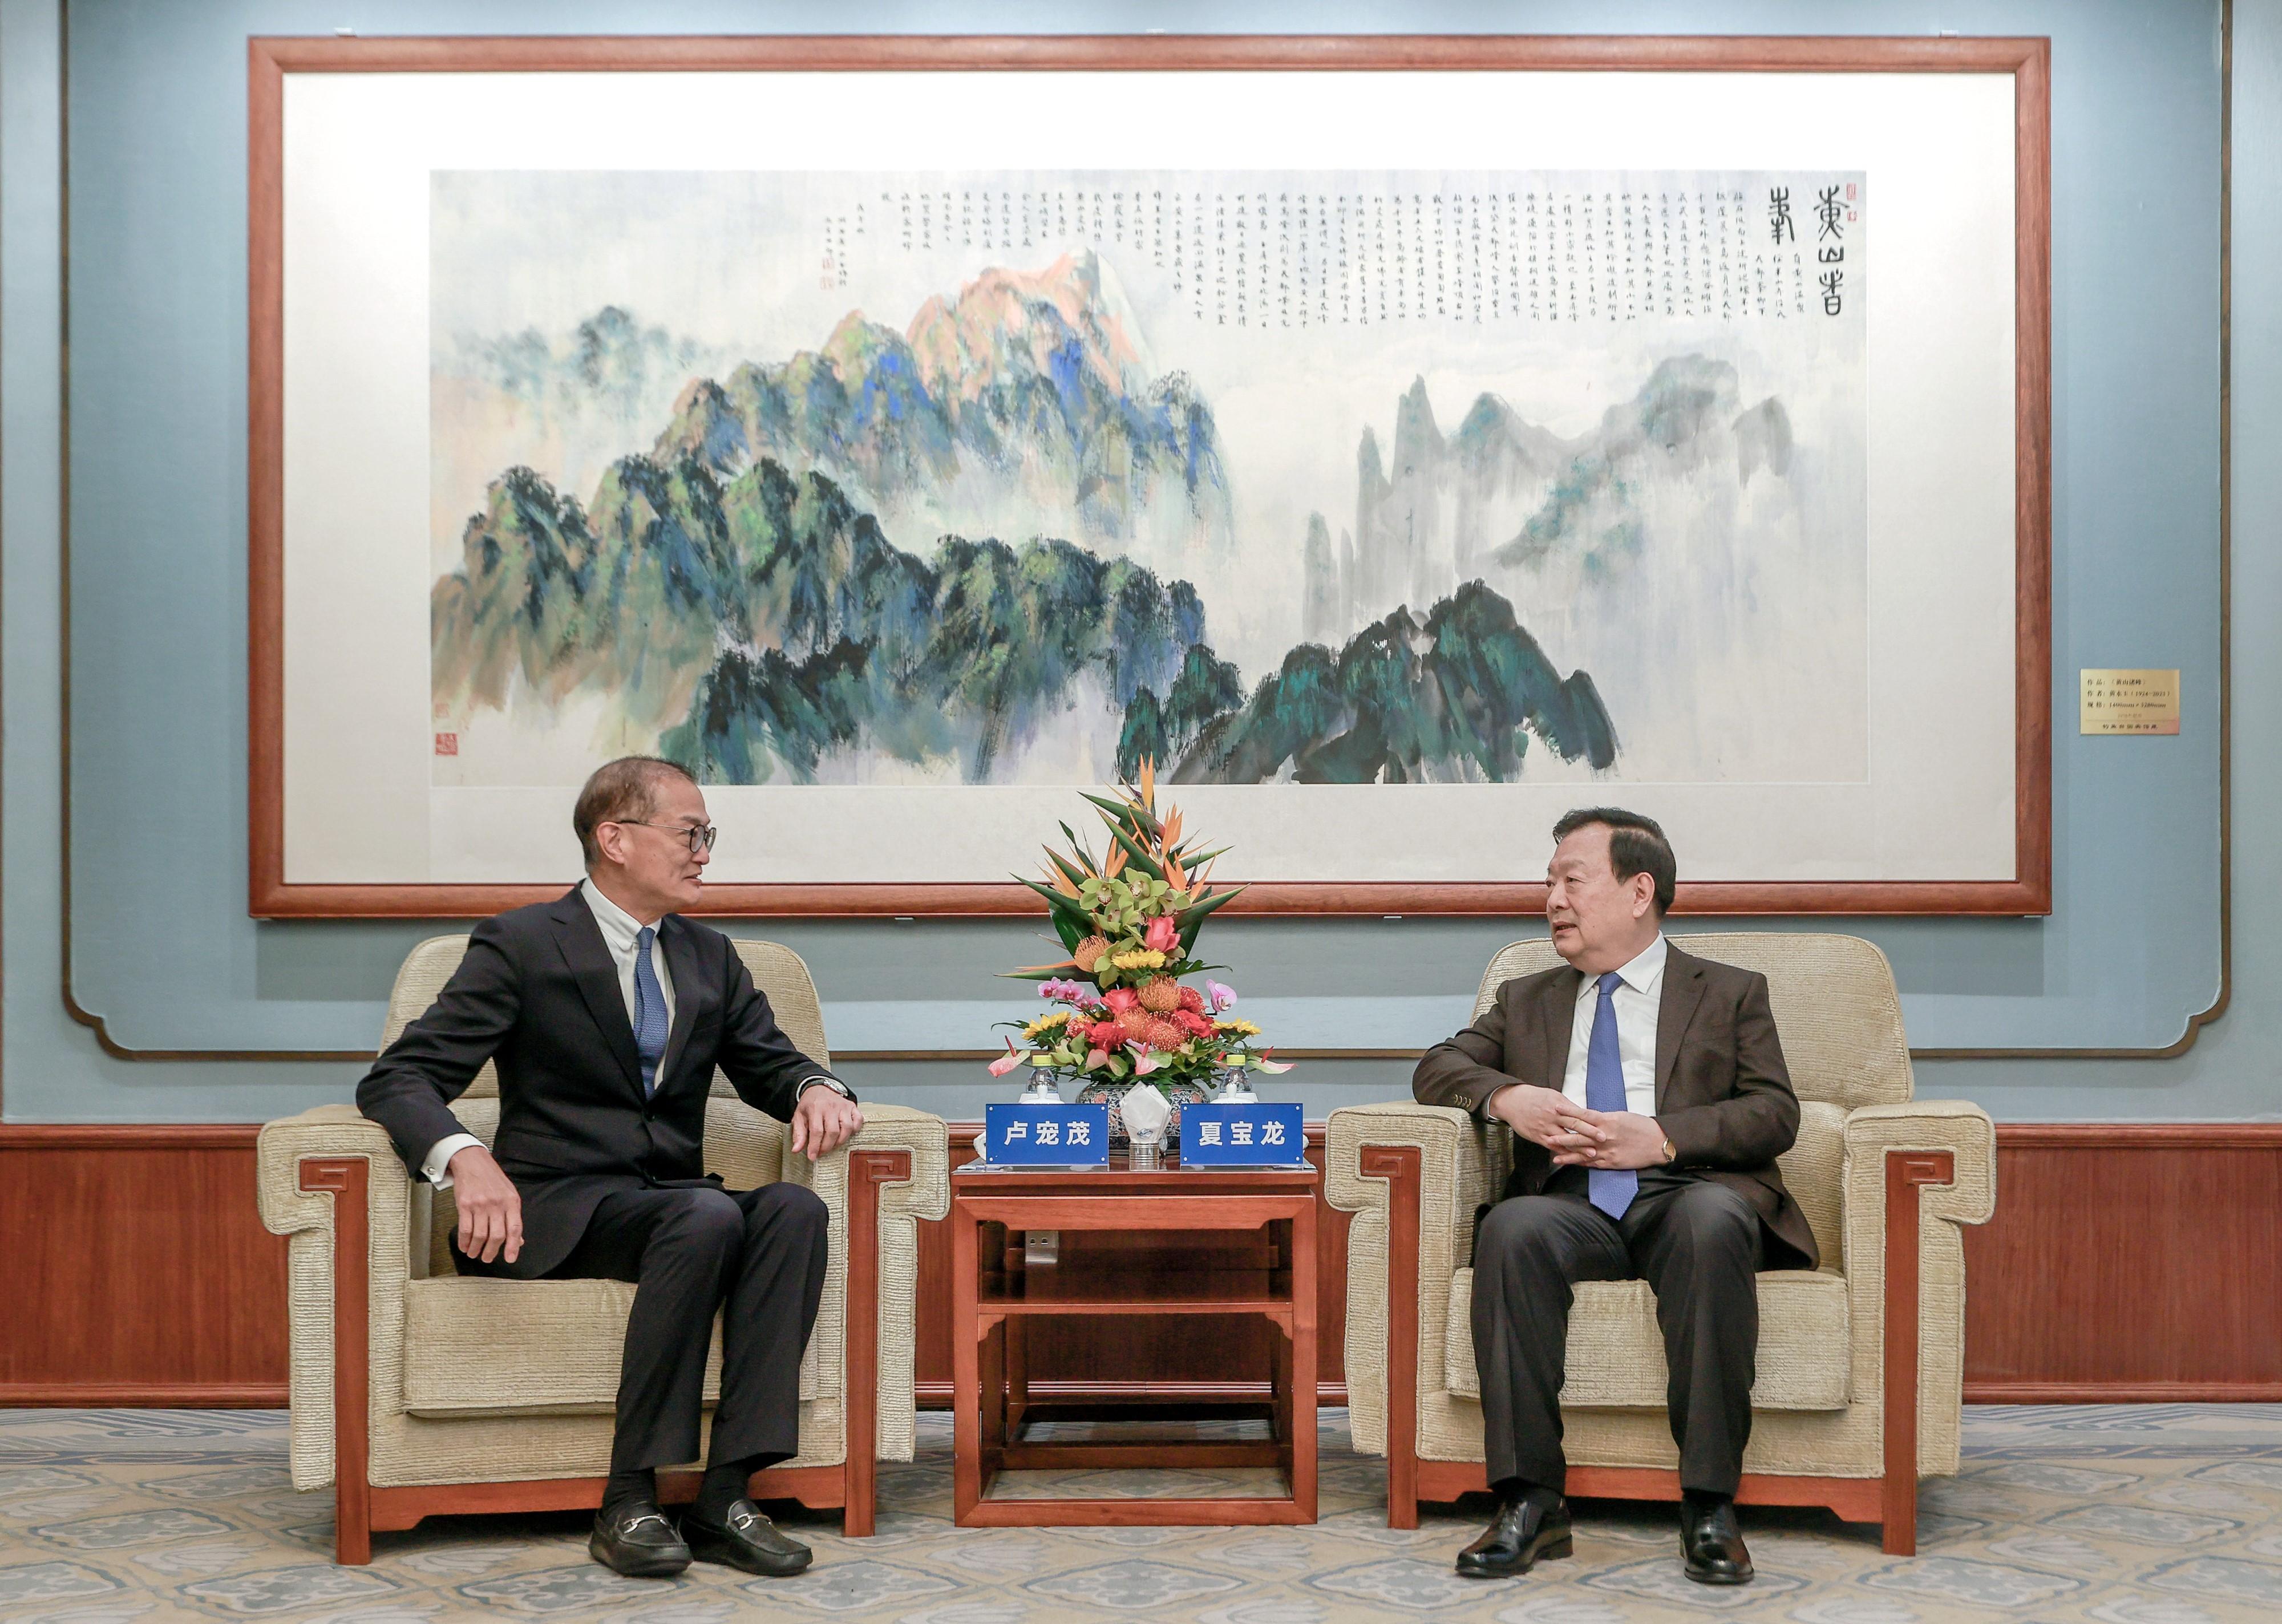 The Secretary for Health, Professor Lo Chung-mau (left), calls on the Director of the Hong Kong and Macao Affairs Office of the State Council, Mr Xia Baolong (right), in Beijing today (November 7) to introduce to him the overview of Hong Kong’s healthcare system.